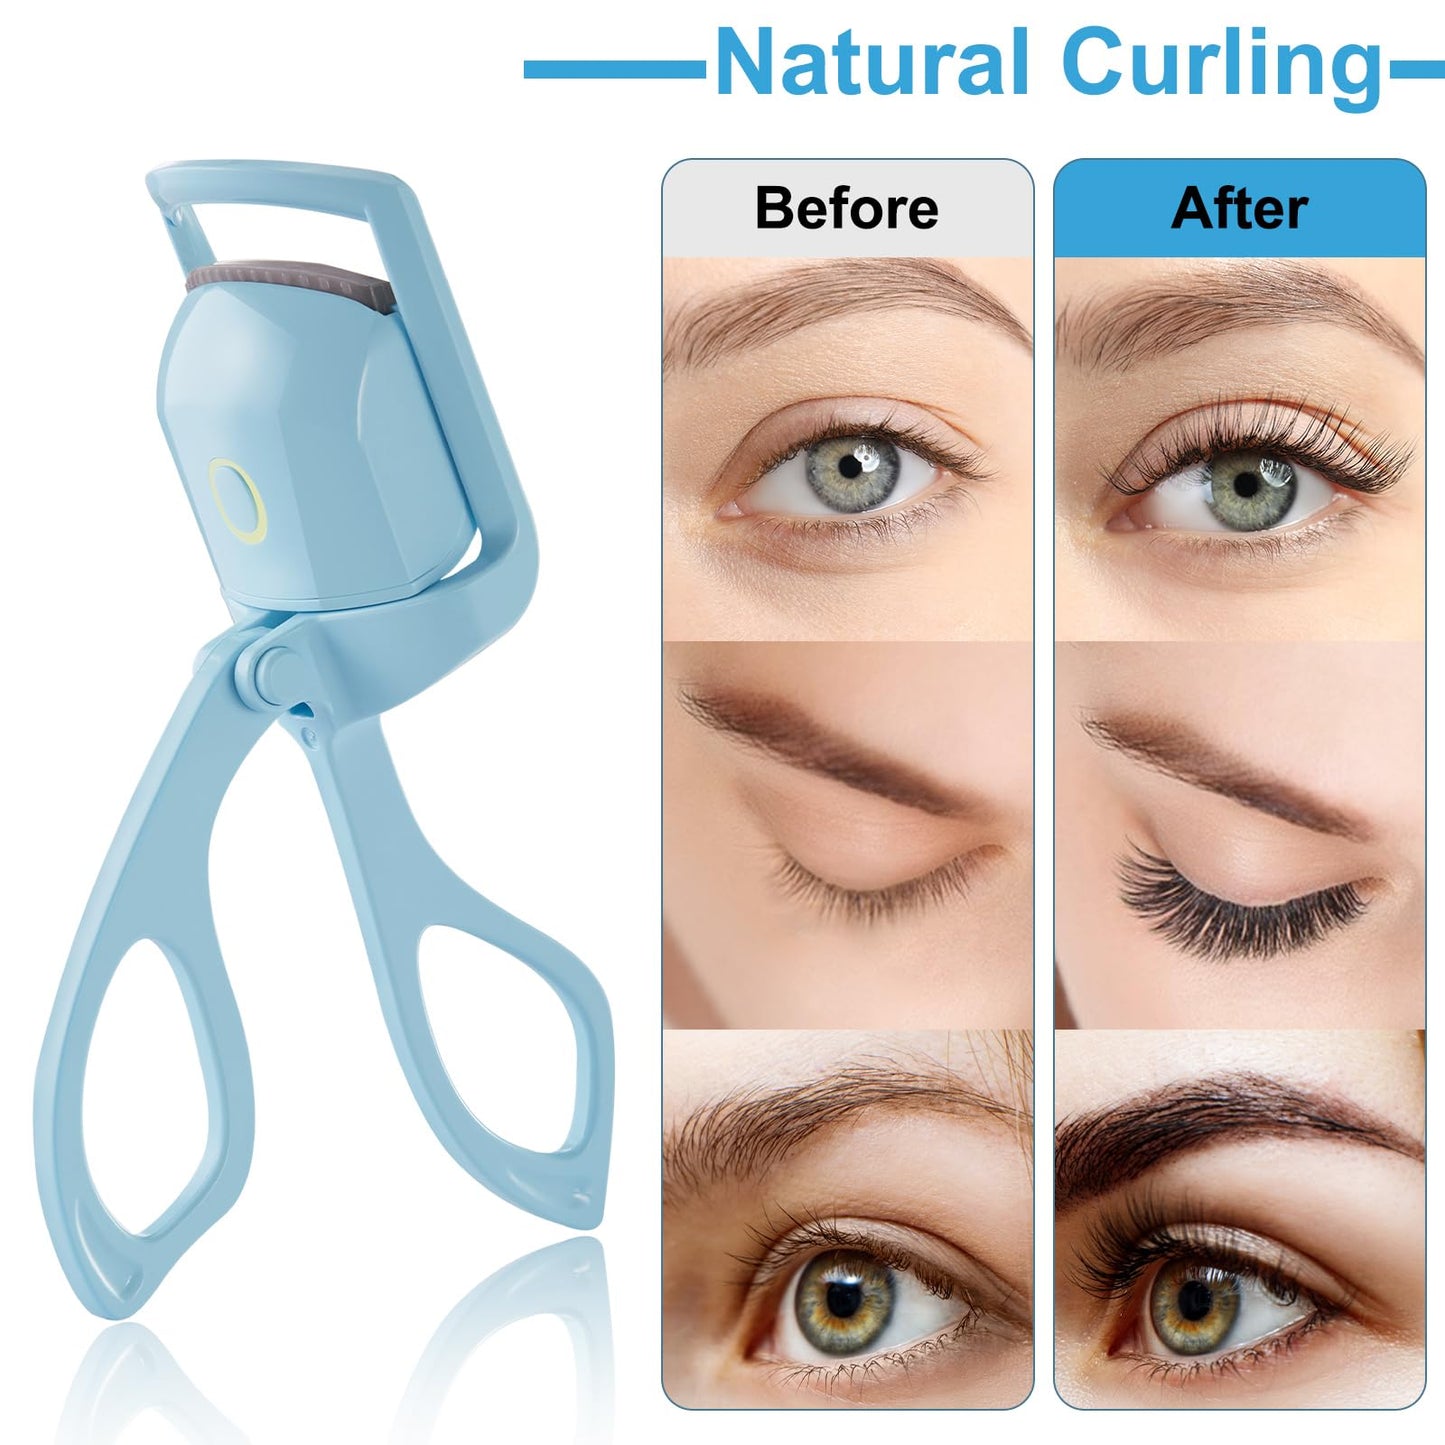 Heated Eyelash Curlers,Heated lash Curler,Handheld Eye Lash Curler,Electric Eyelash Curler,3 Heating Modes with Sensing Heating Silicone Pad,Quick Natural Curling Eye Lashes,Blue